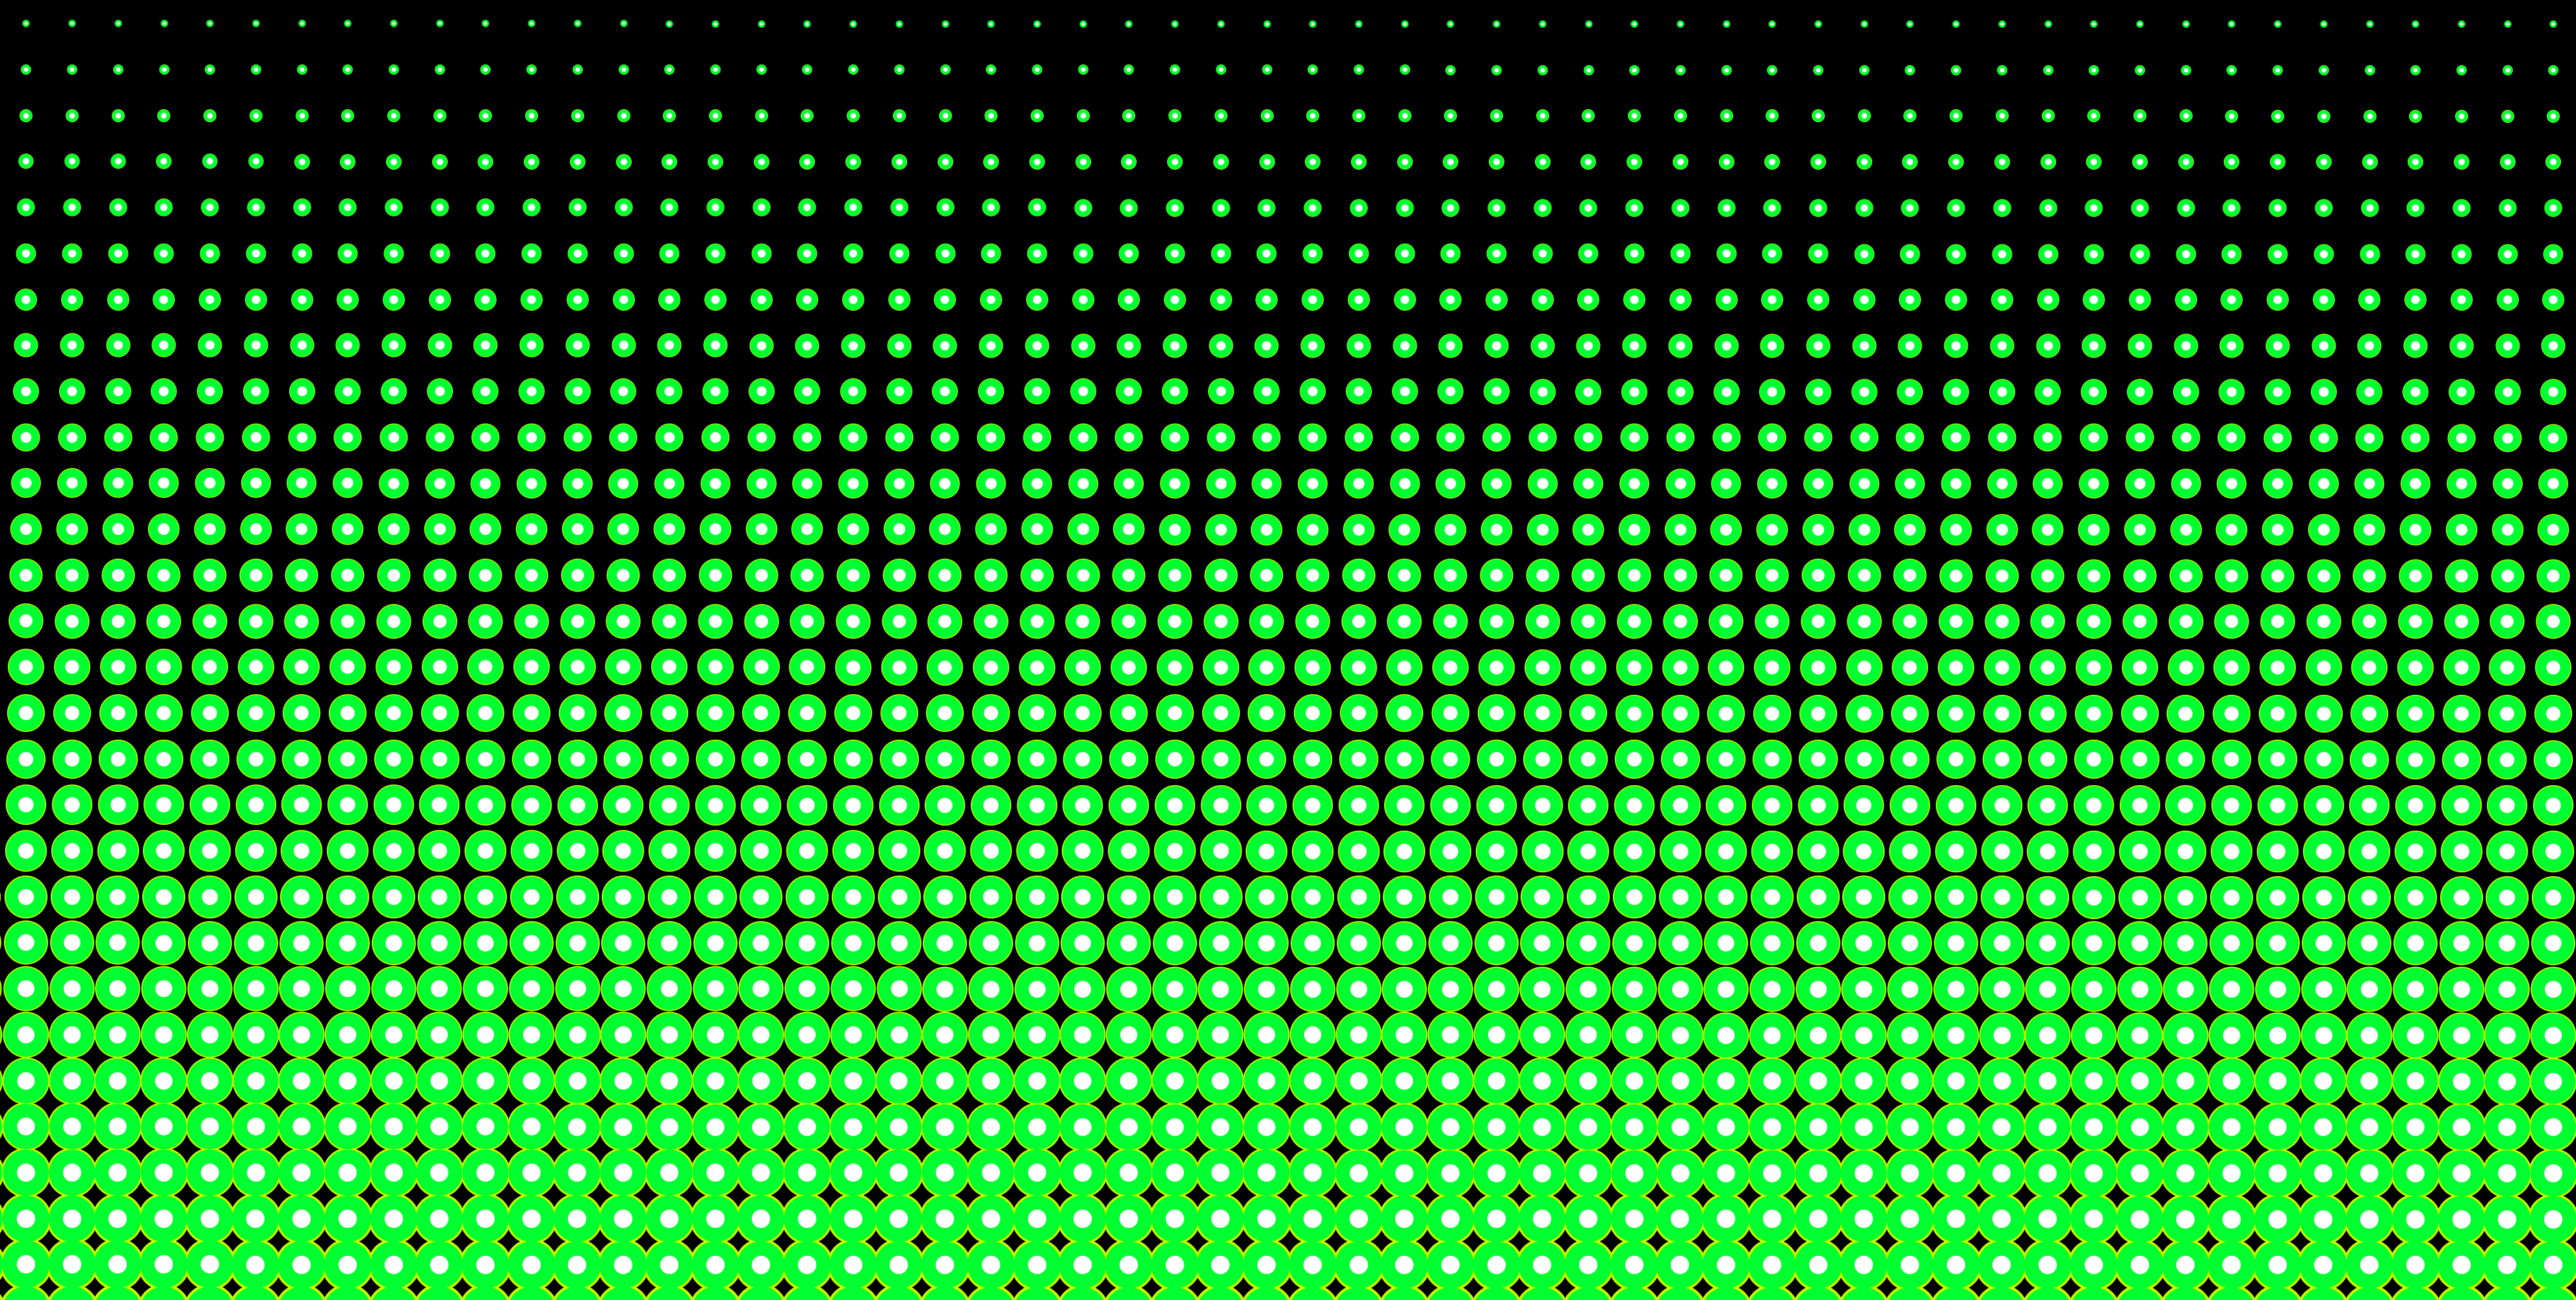 Neon Green and Black Halftone Pattern   Free Clip Art